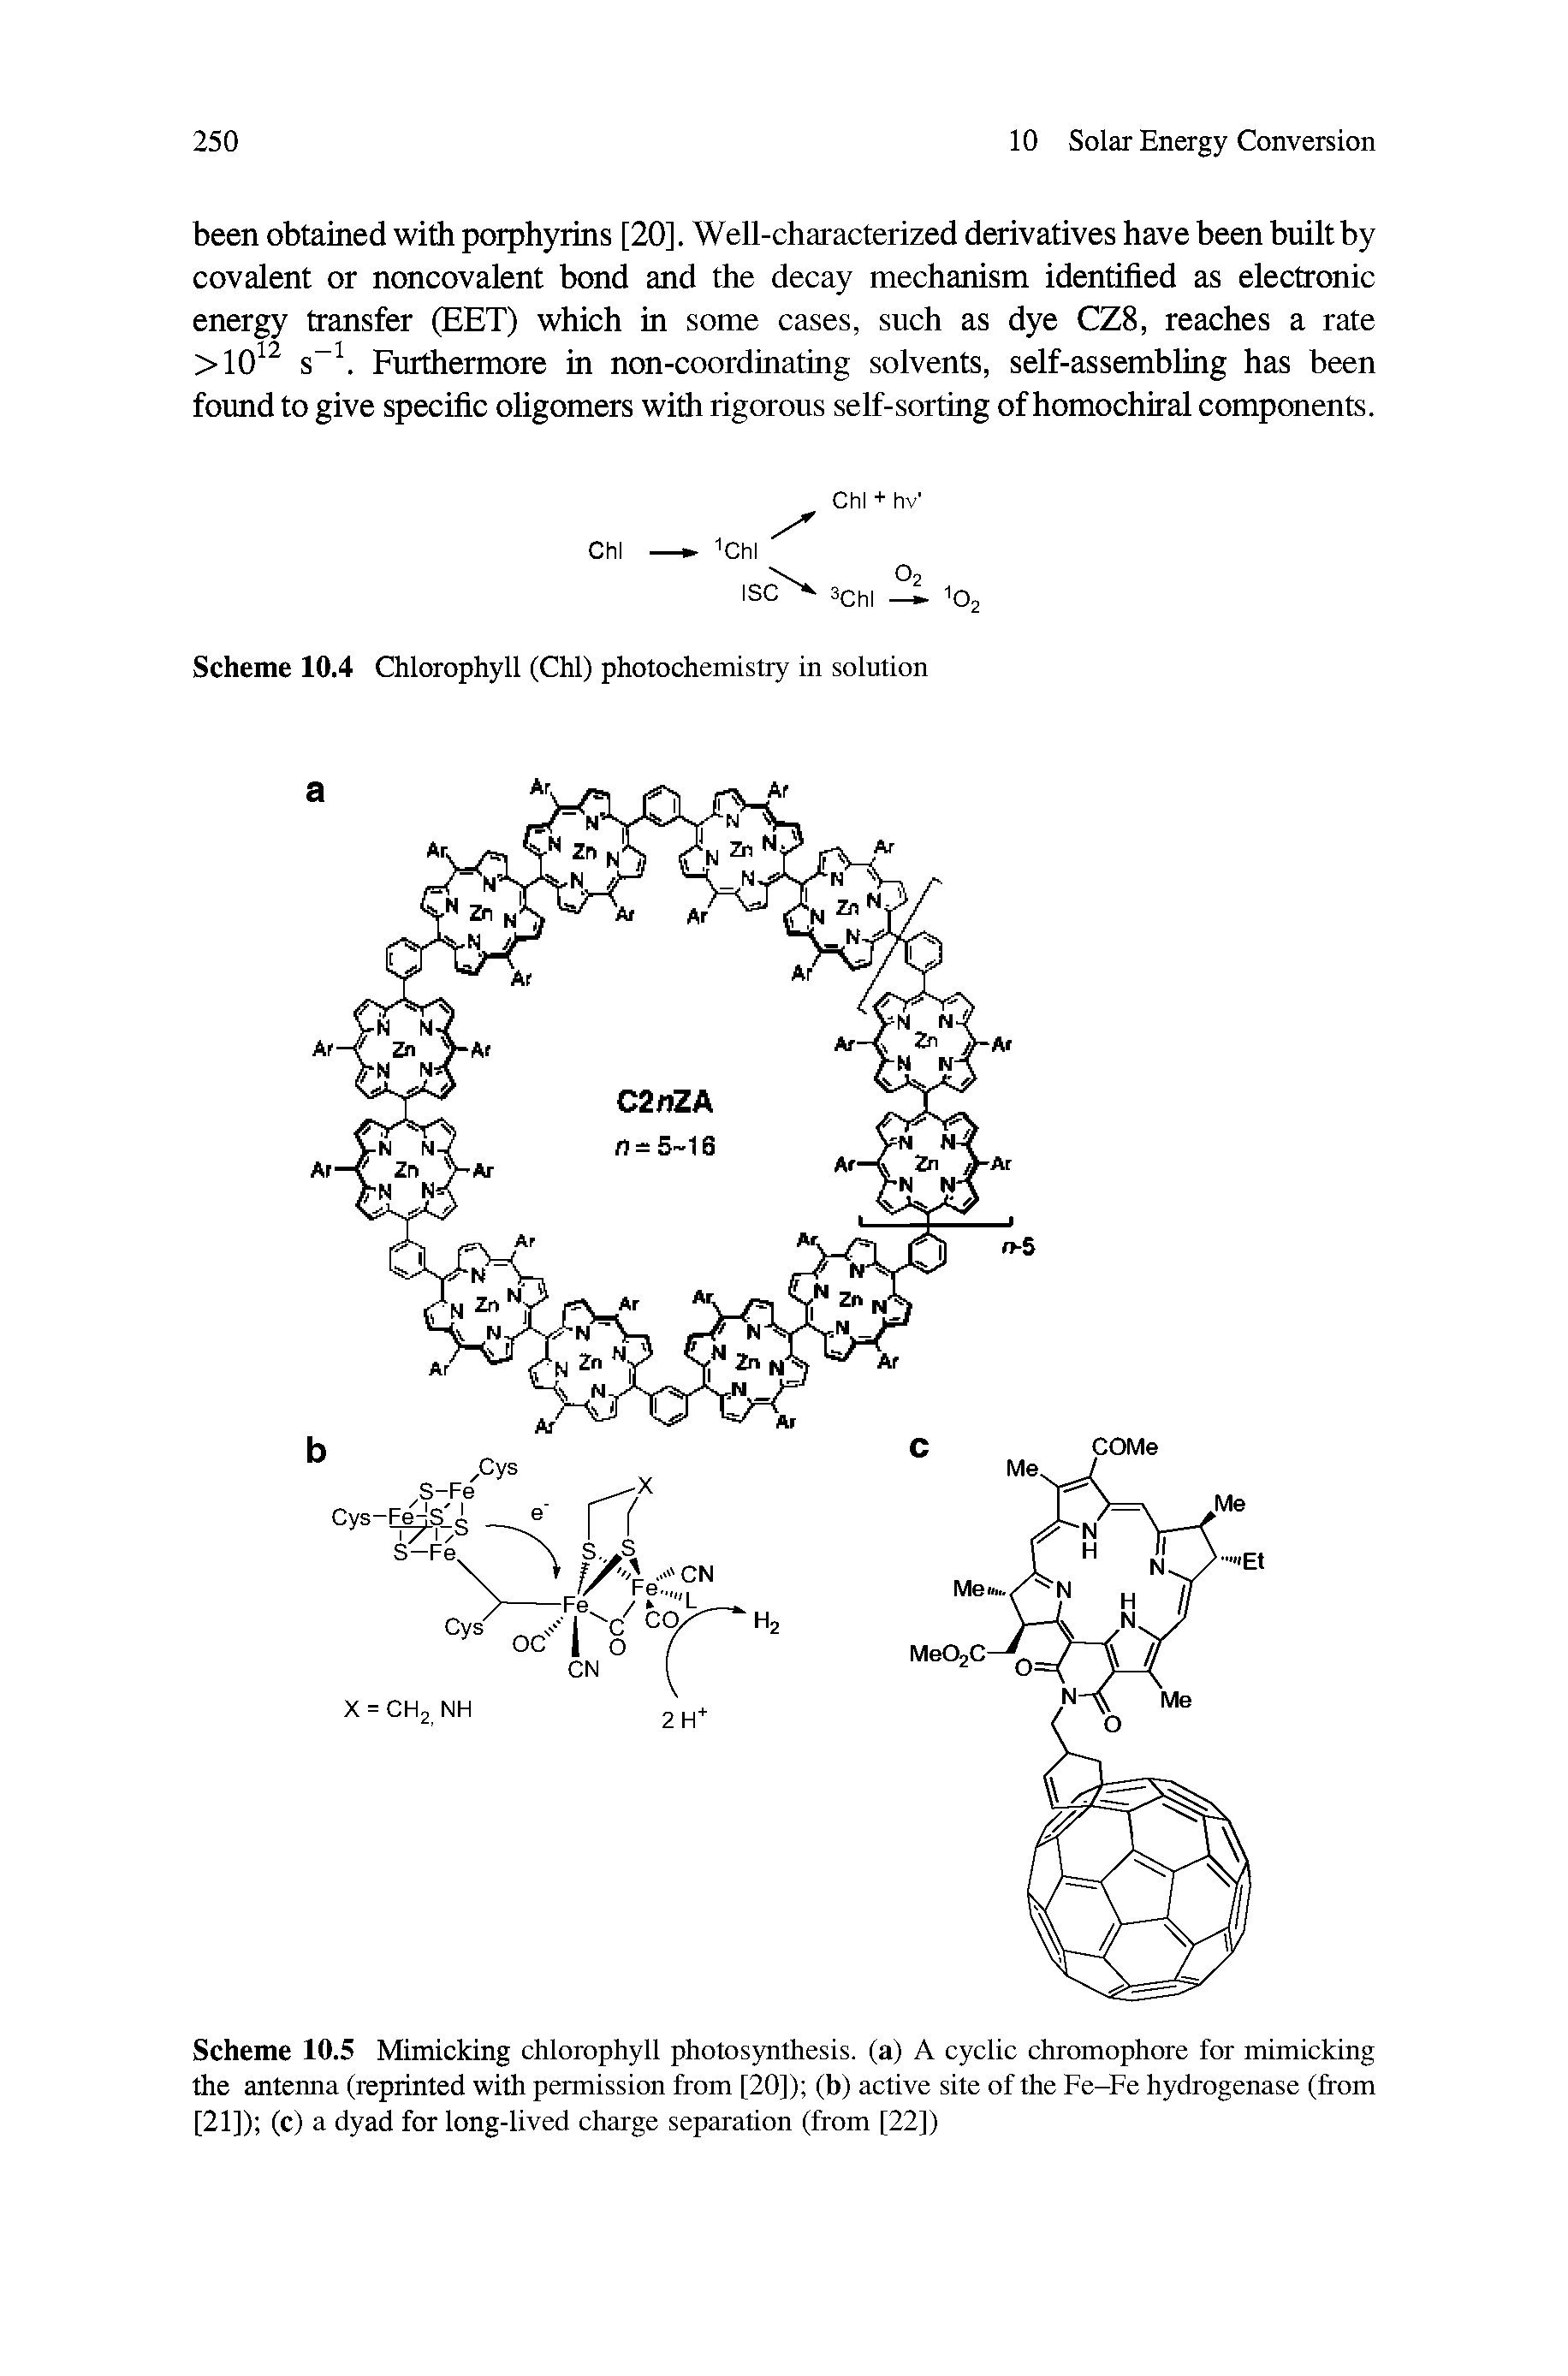 Scheme 10.5 Mimicking chlorophyll photosynthesis, (a) A cyclic chromophore for mimicking the antenna (reprinted with permission from [20]) (b) active site of the Fe-Fe hydrogenase (from [21]) (c) a dyad for long-lived charge separation (from [22])...